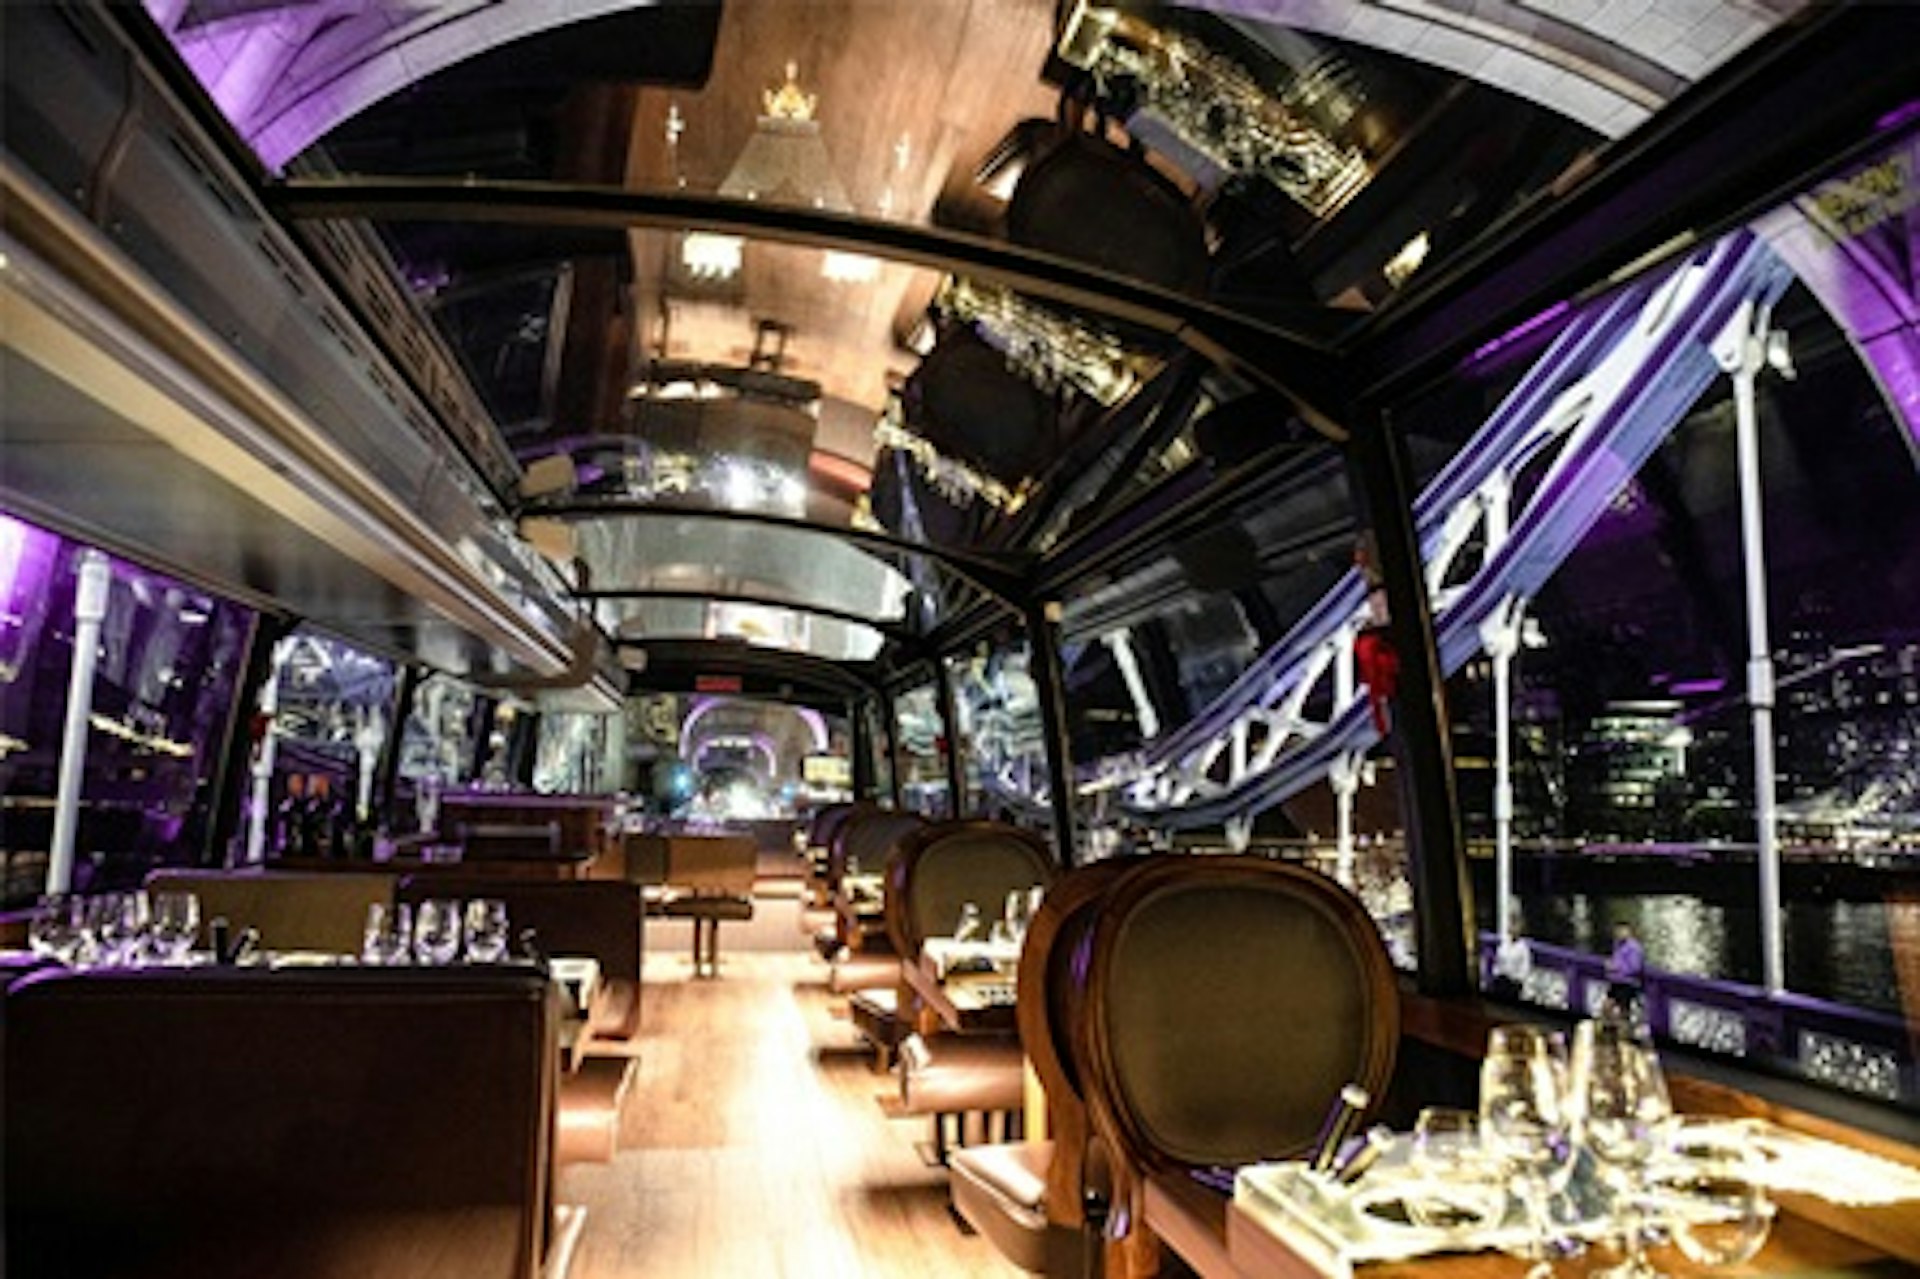 Six Course Dinner with Wine Pairing and Tour for Two aboard the Bustronome, London 2